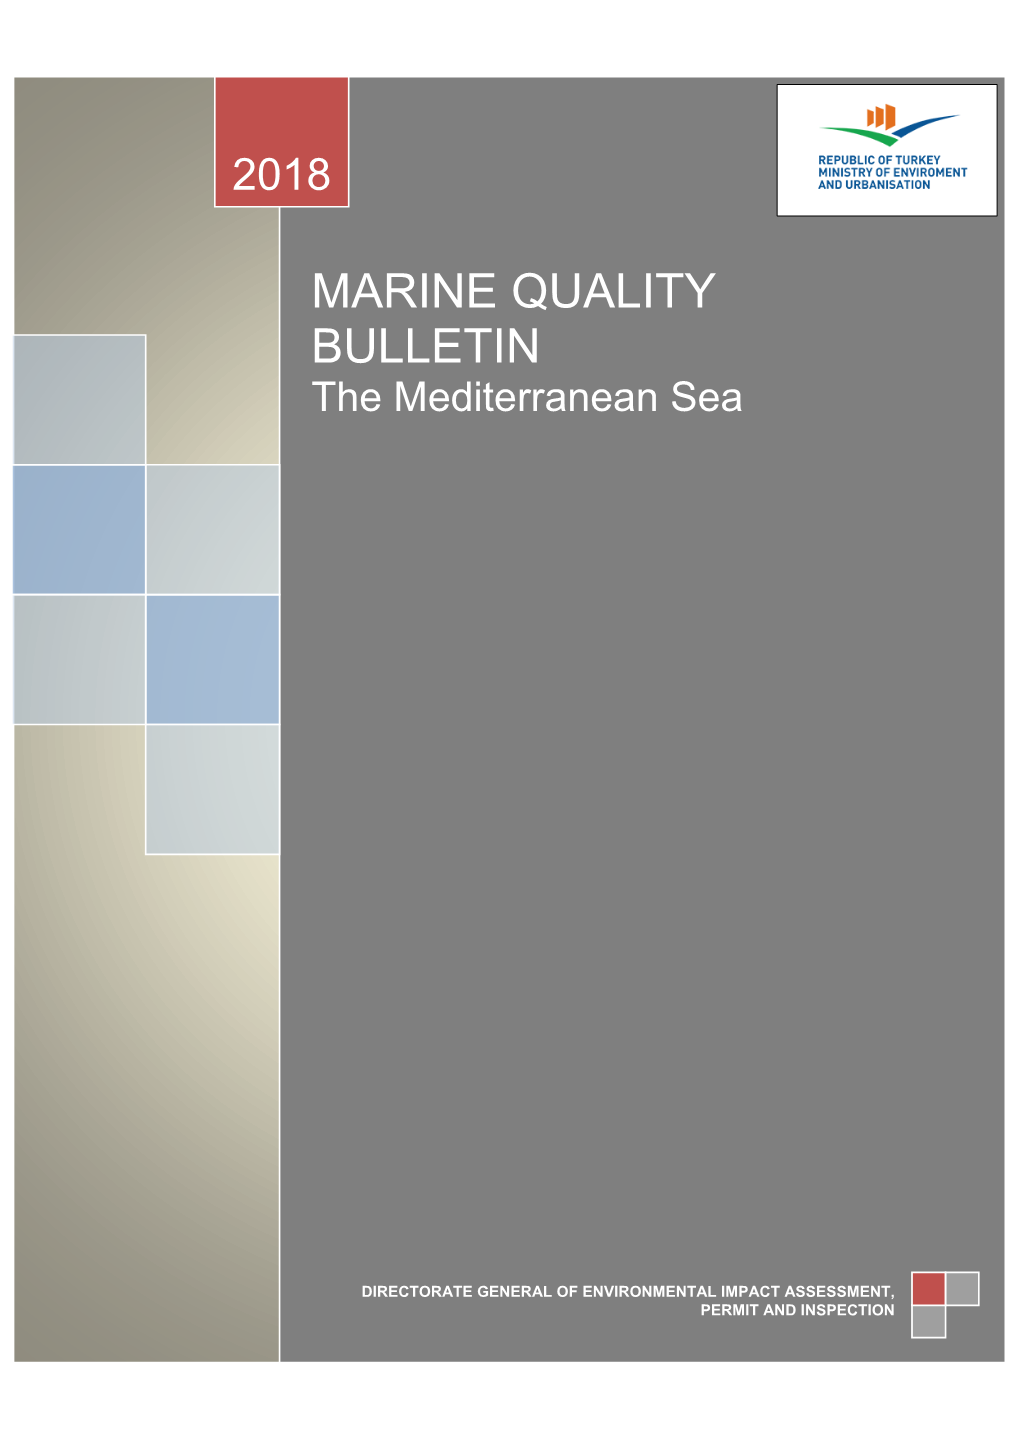 Marine Quality Bulletin Is Published As Part of the Official Statistics Program (OSP)